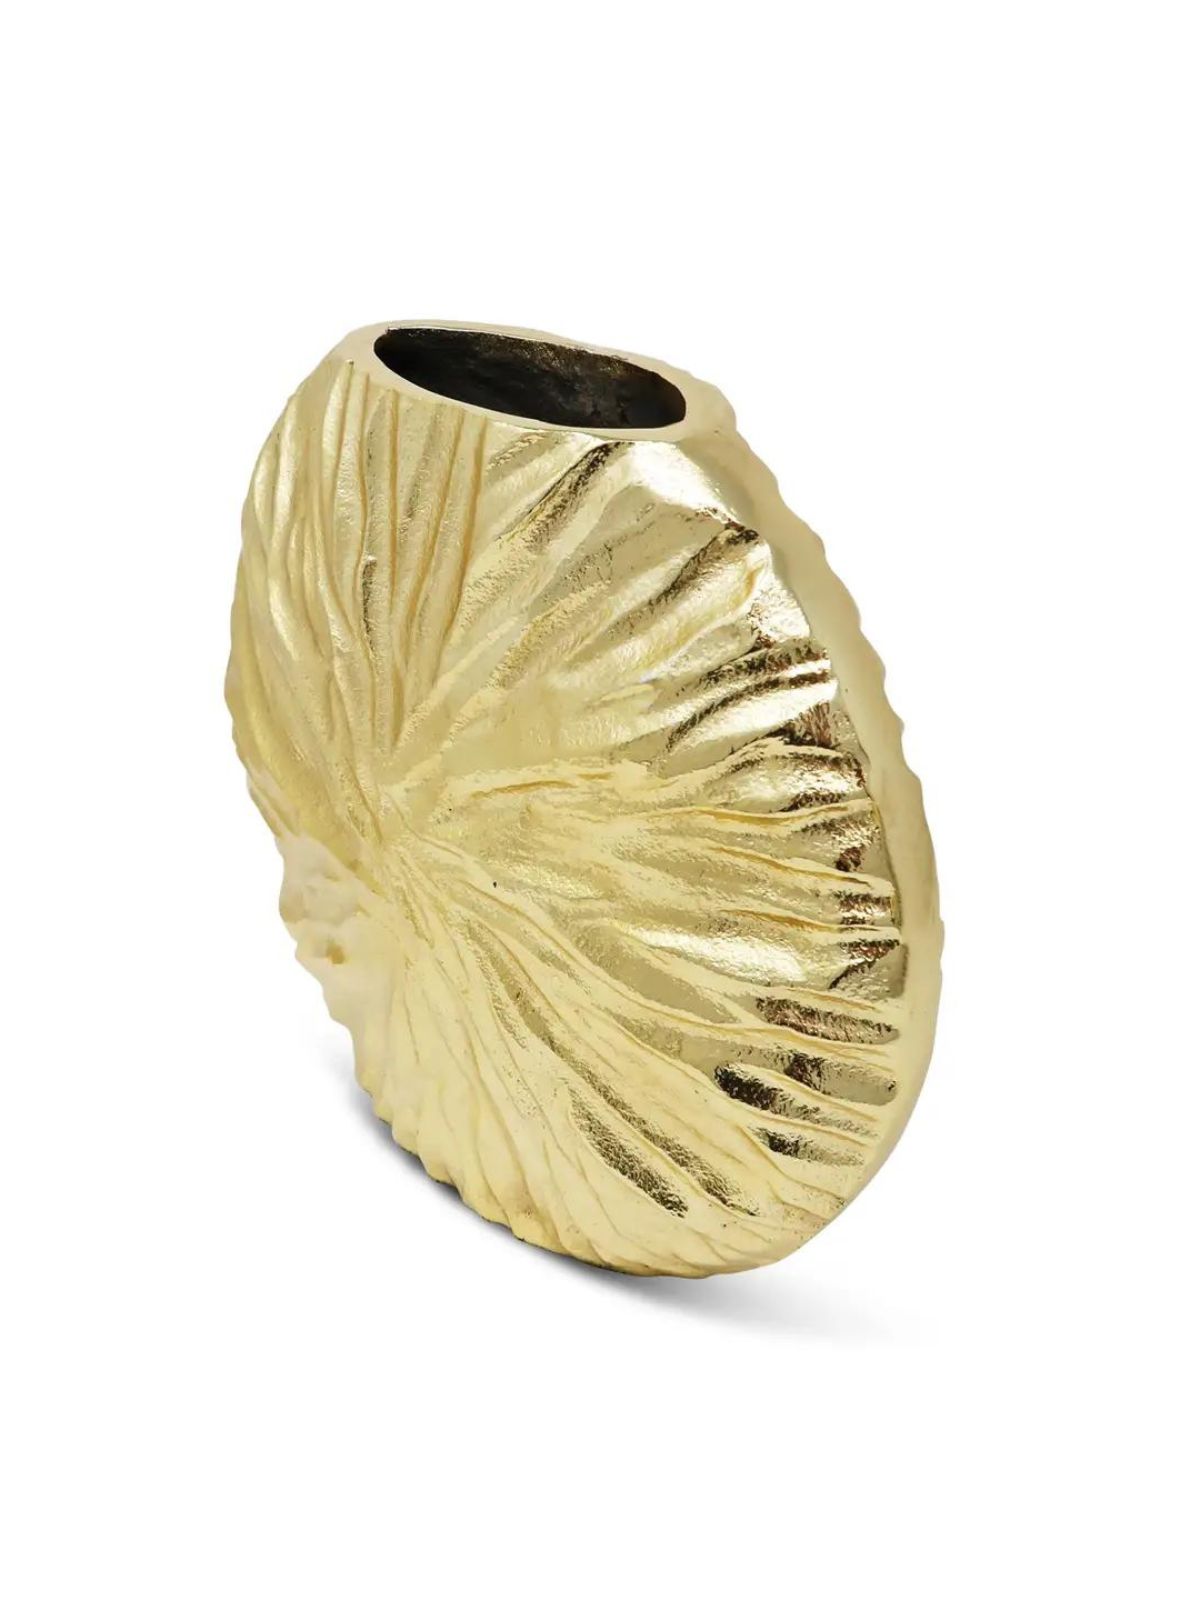 Gold round luxury vase with a stunning textured finish, perfect for elevating your home decor. Product Measures, 9.5L x 3.25W x 8.25H inches. Imported.